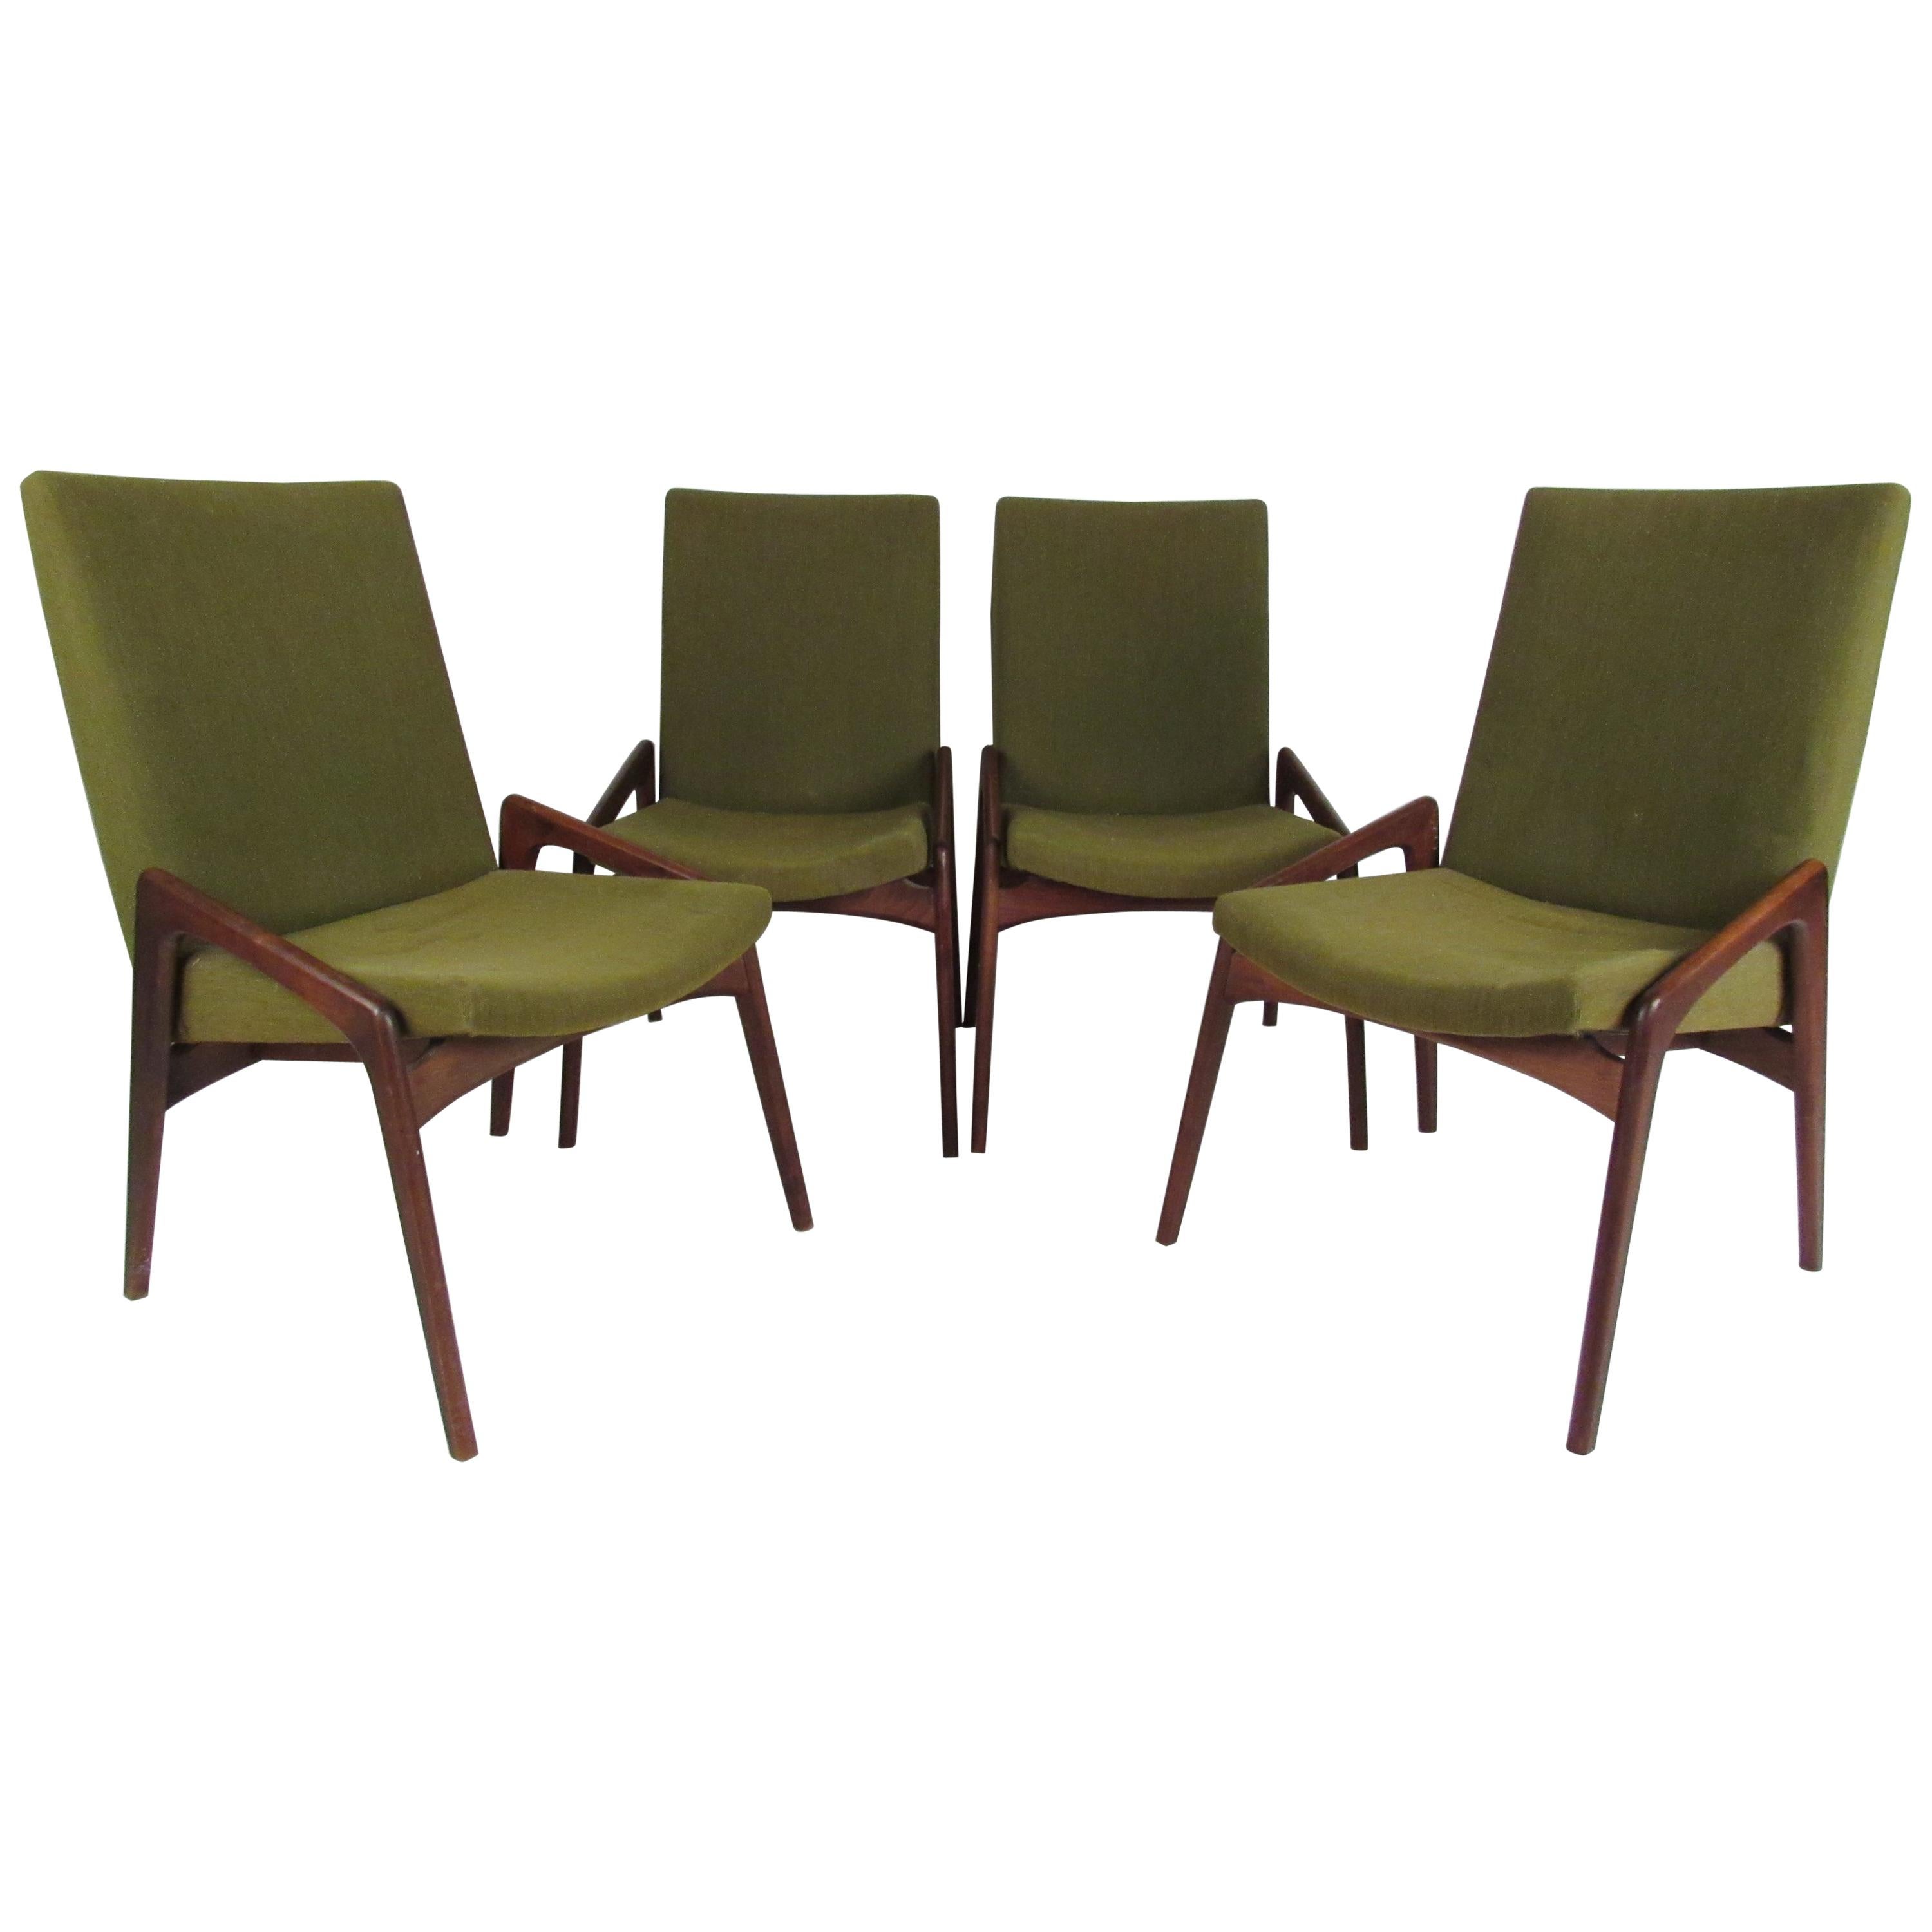 Set of Four Mid-Century Modern Dining Chairs by John Stuart